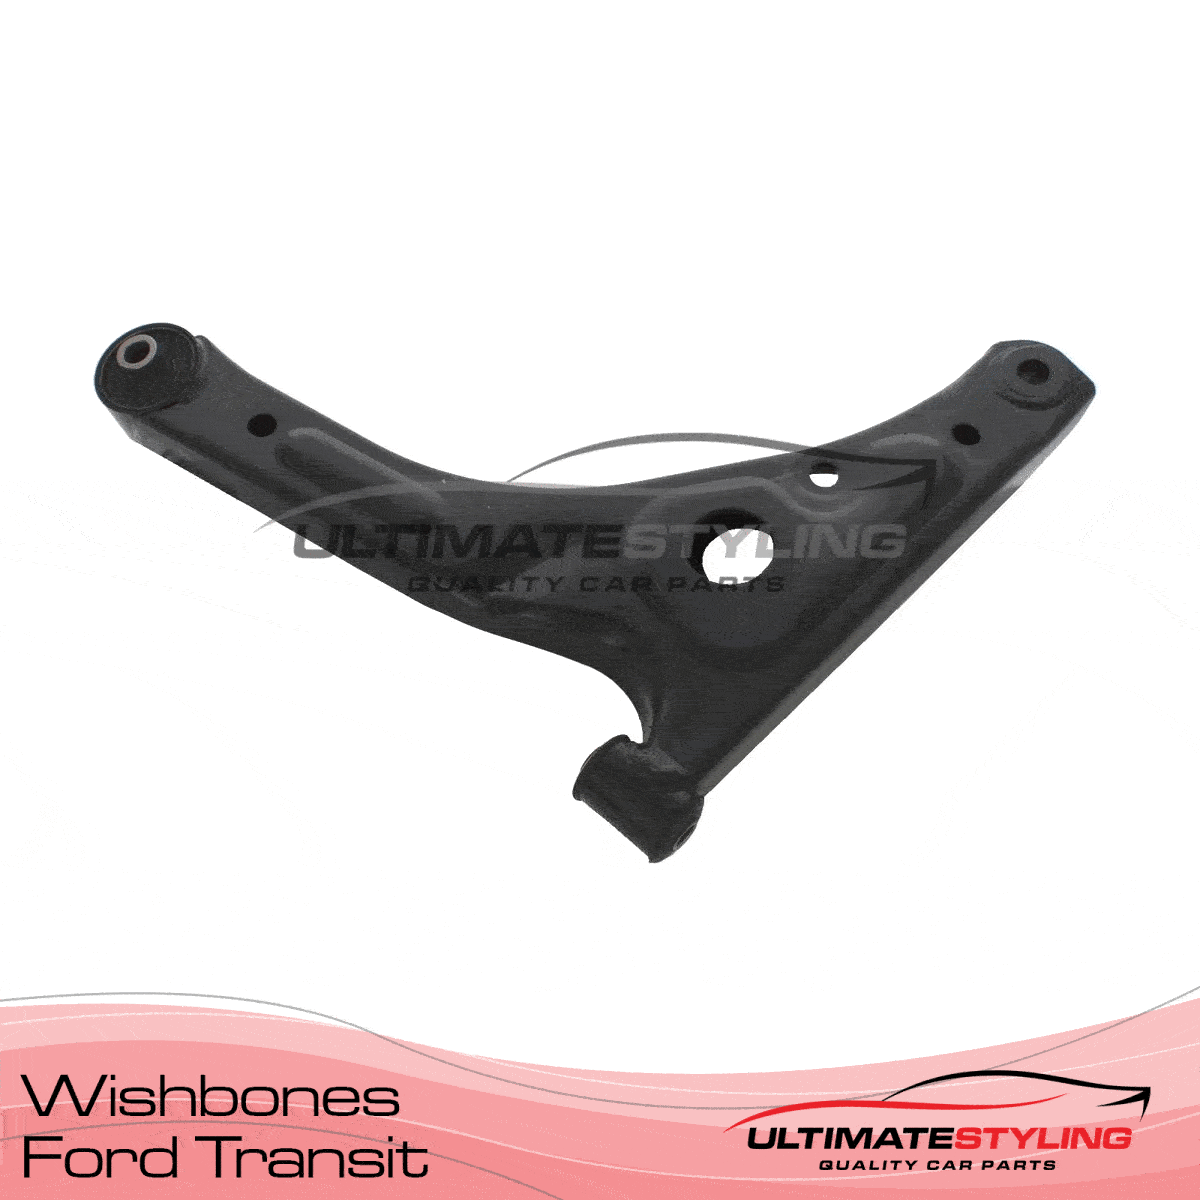 360 degree view of a Ford Transit wishbone